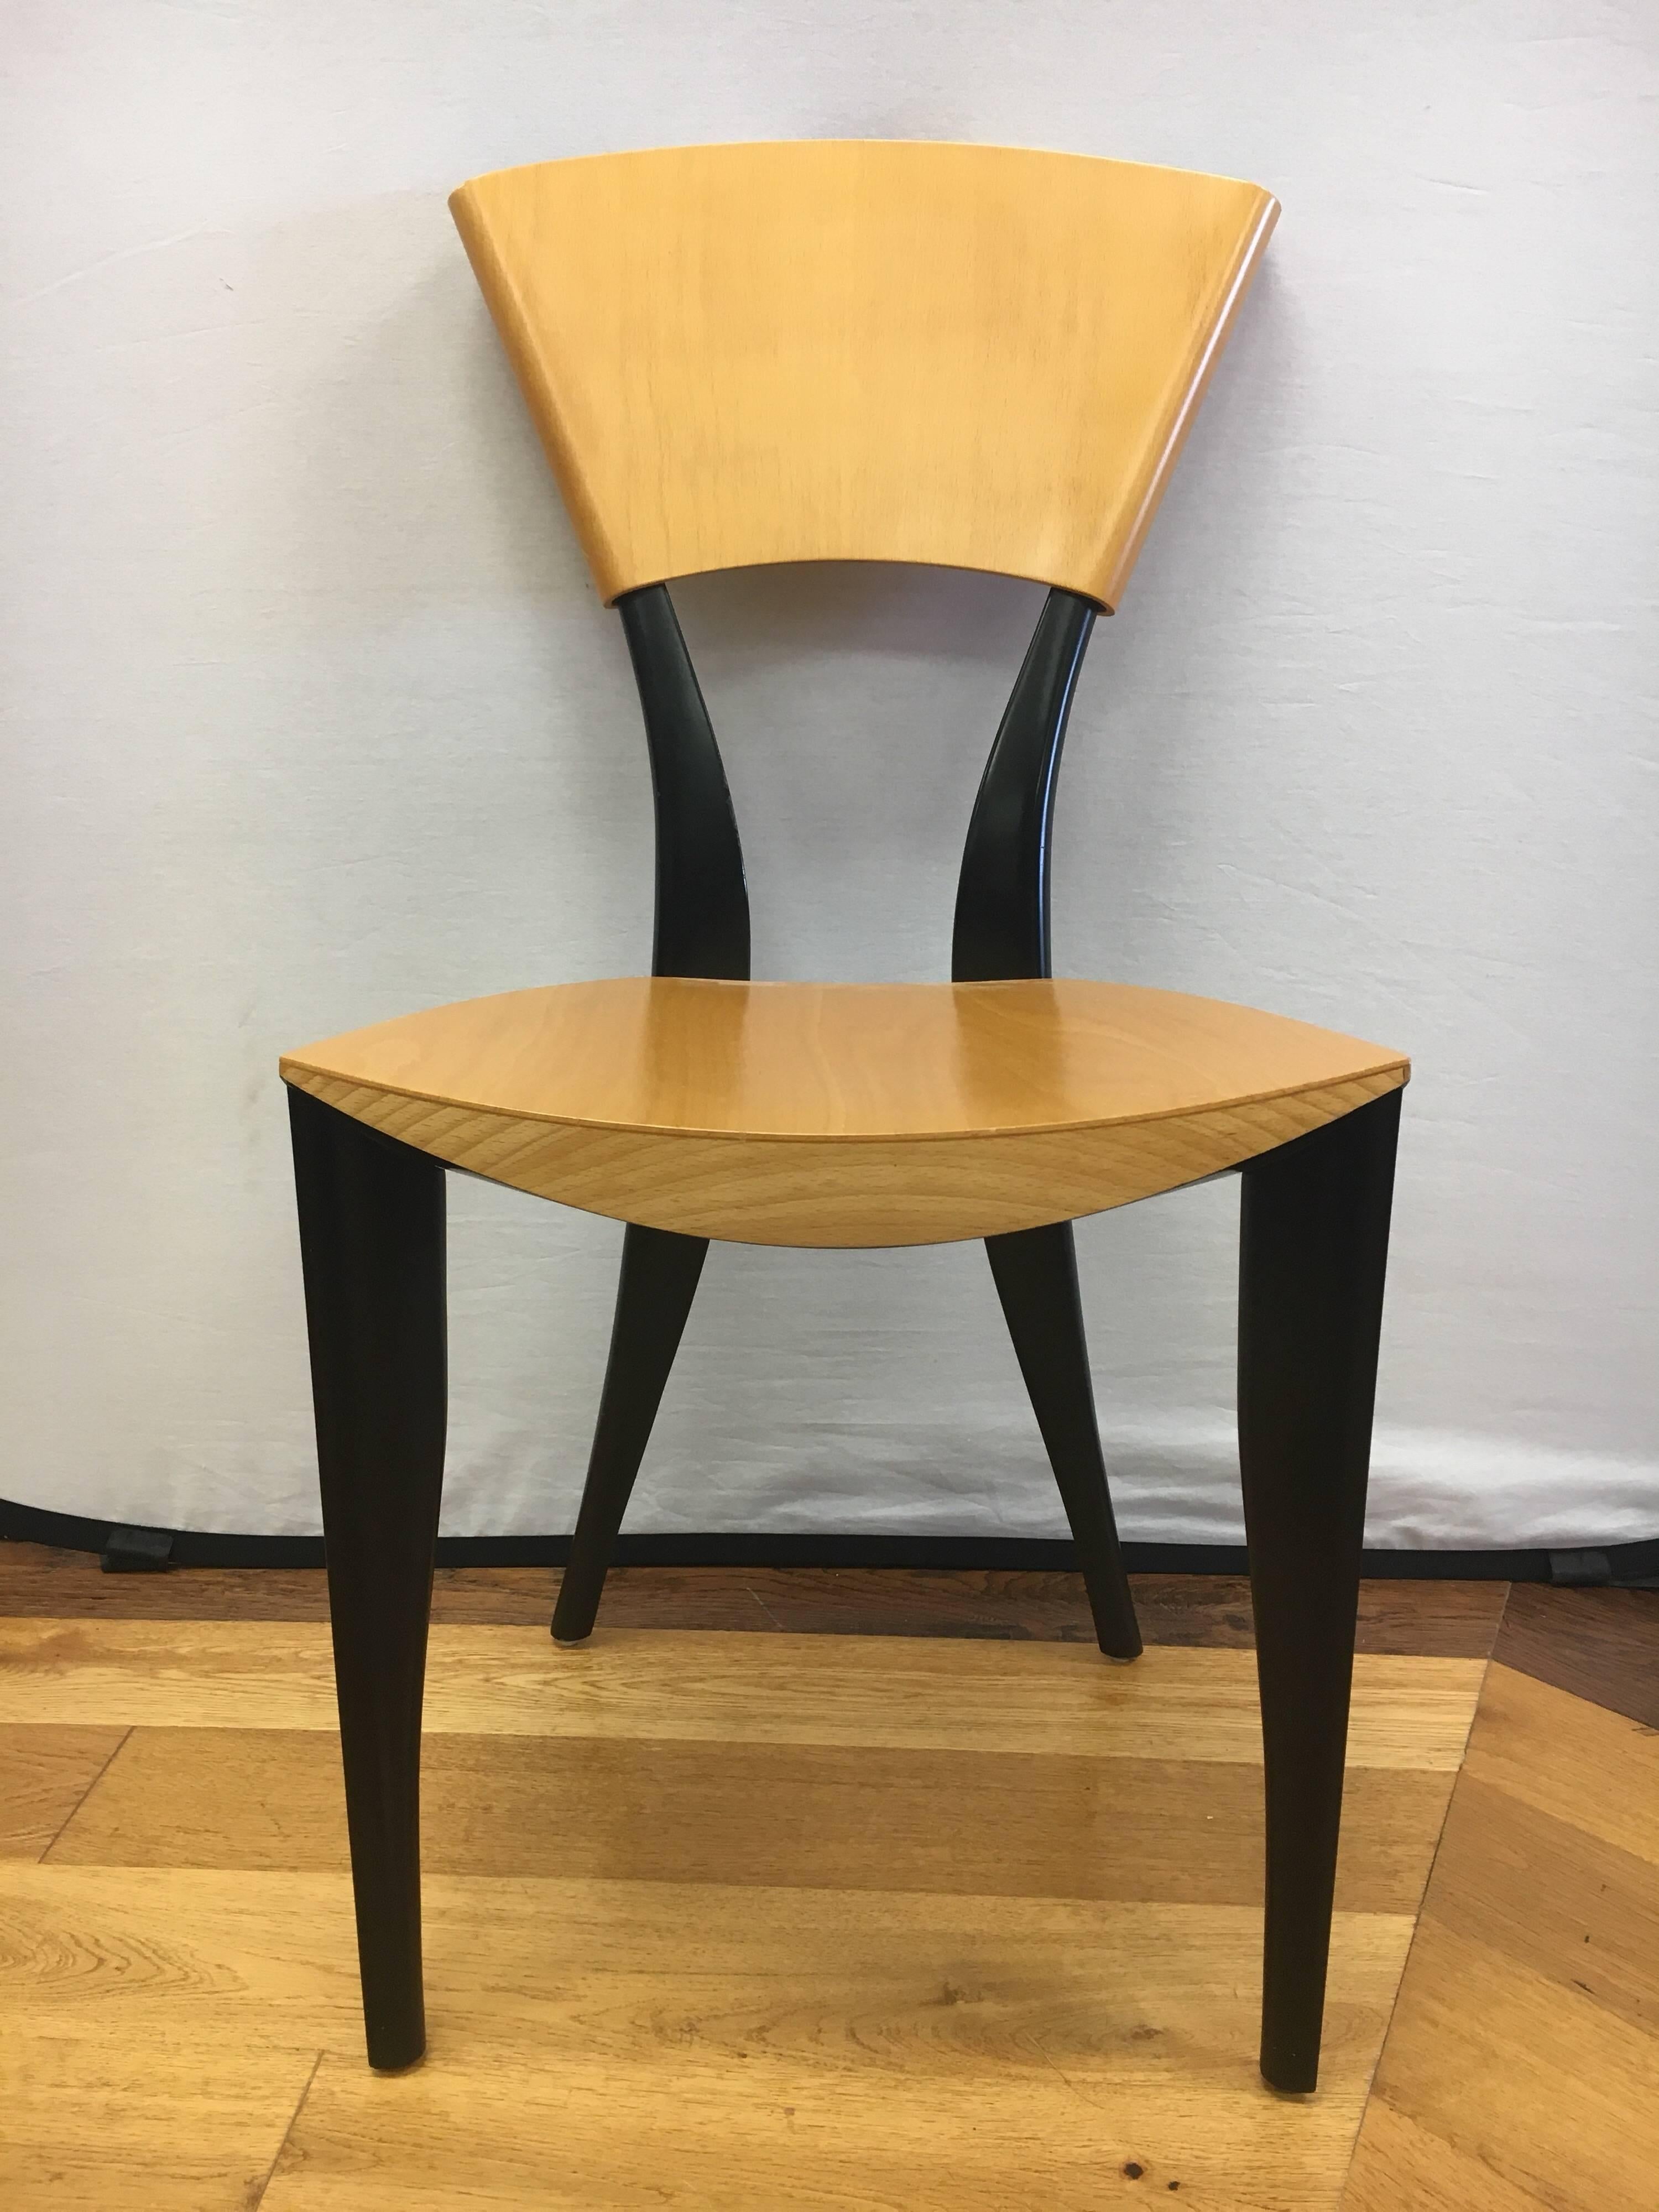 Set of three matching Sawaya and Moroni chairs signed by Mancini and Gaby Dorell.
Made in Italy and featuring the curved, wraparound backrest; so unusual and extraordinary!